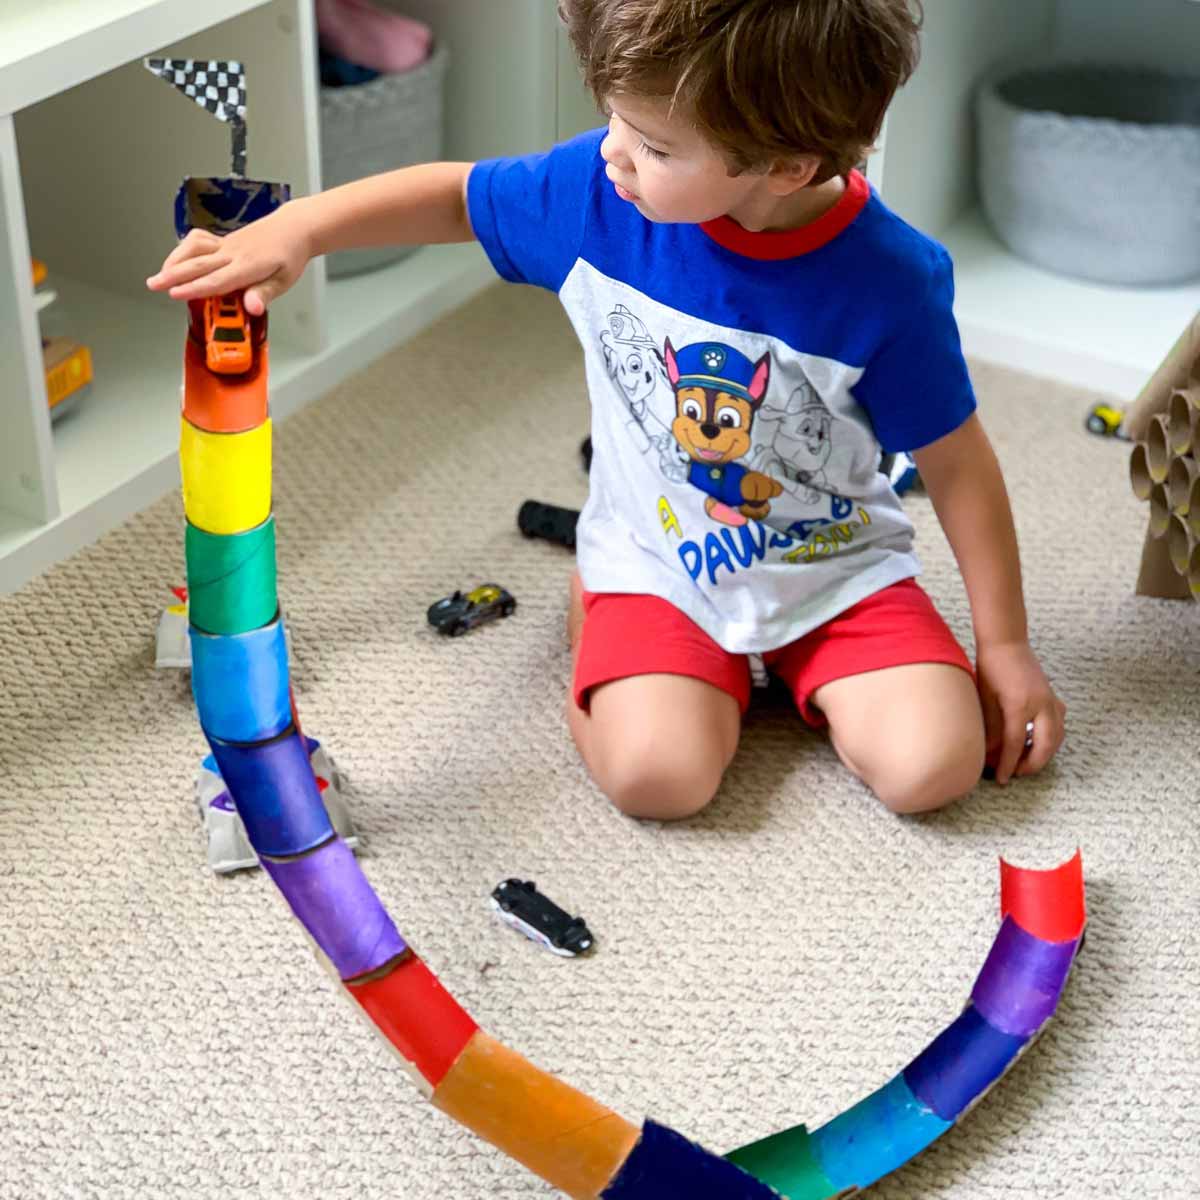 DIY Race Track Out of Toilet Paper Rolls